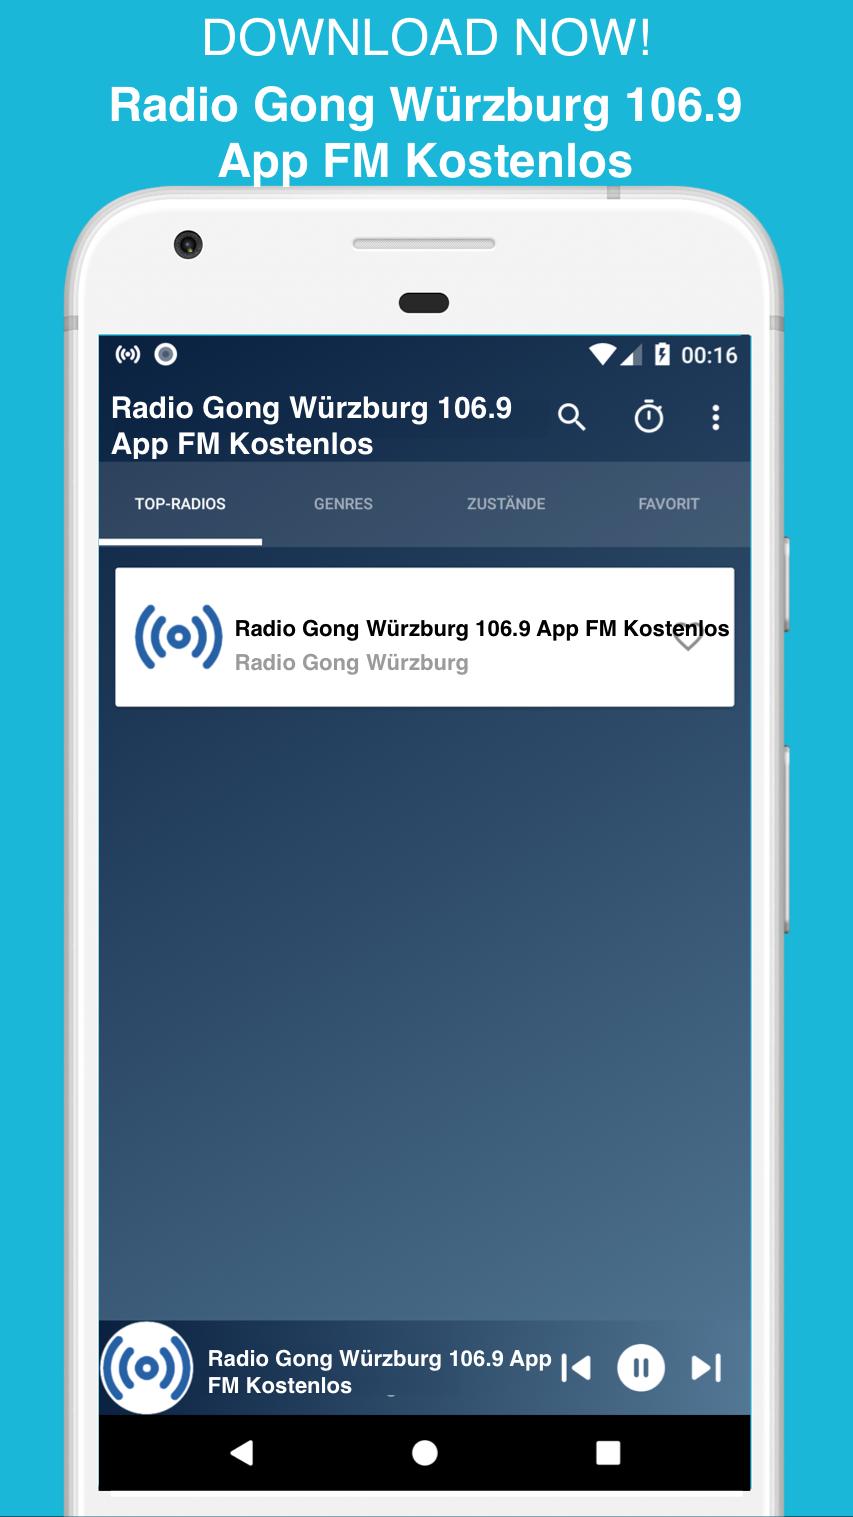 Radio Gong Würzburg 106.9 App FM for Android - APK Download